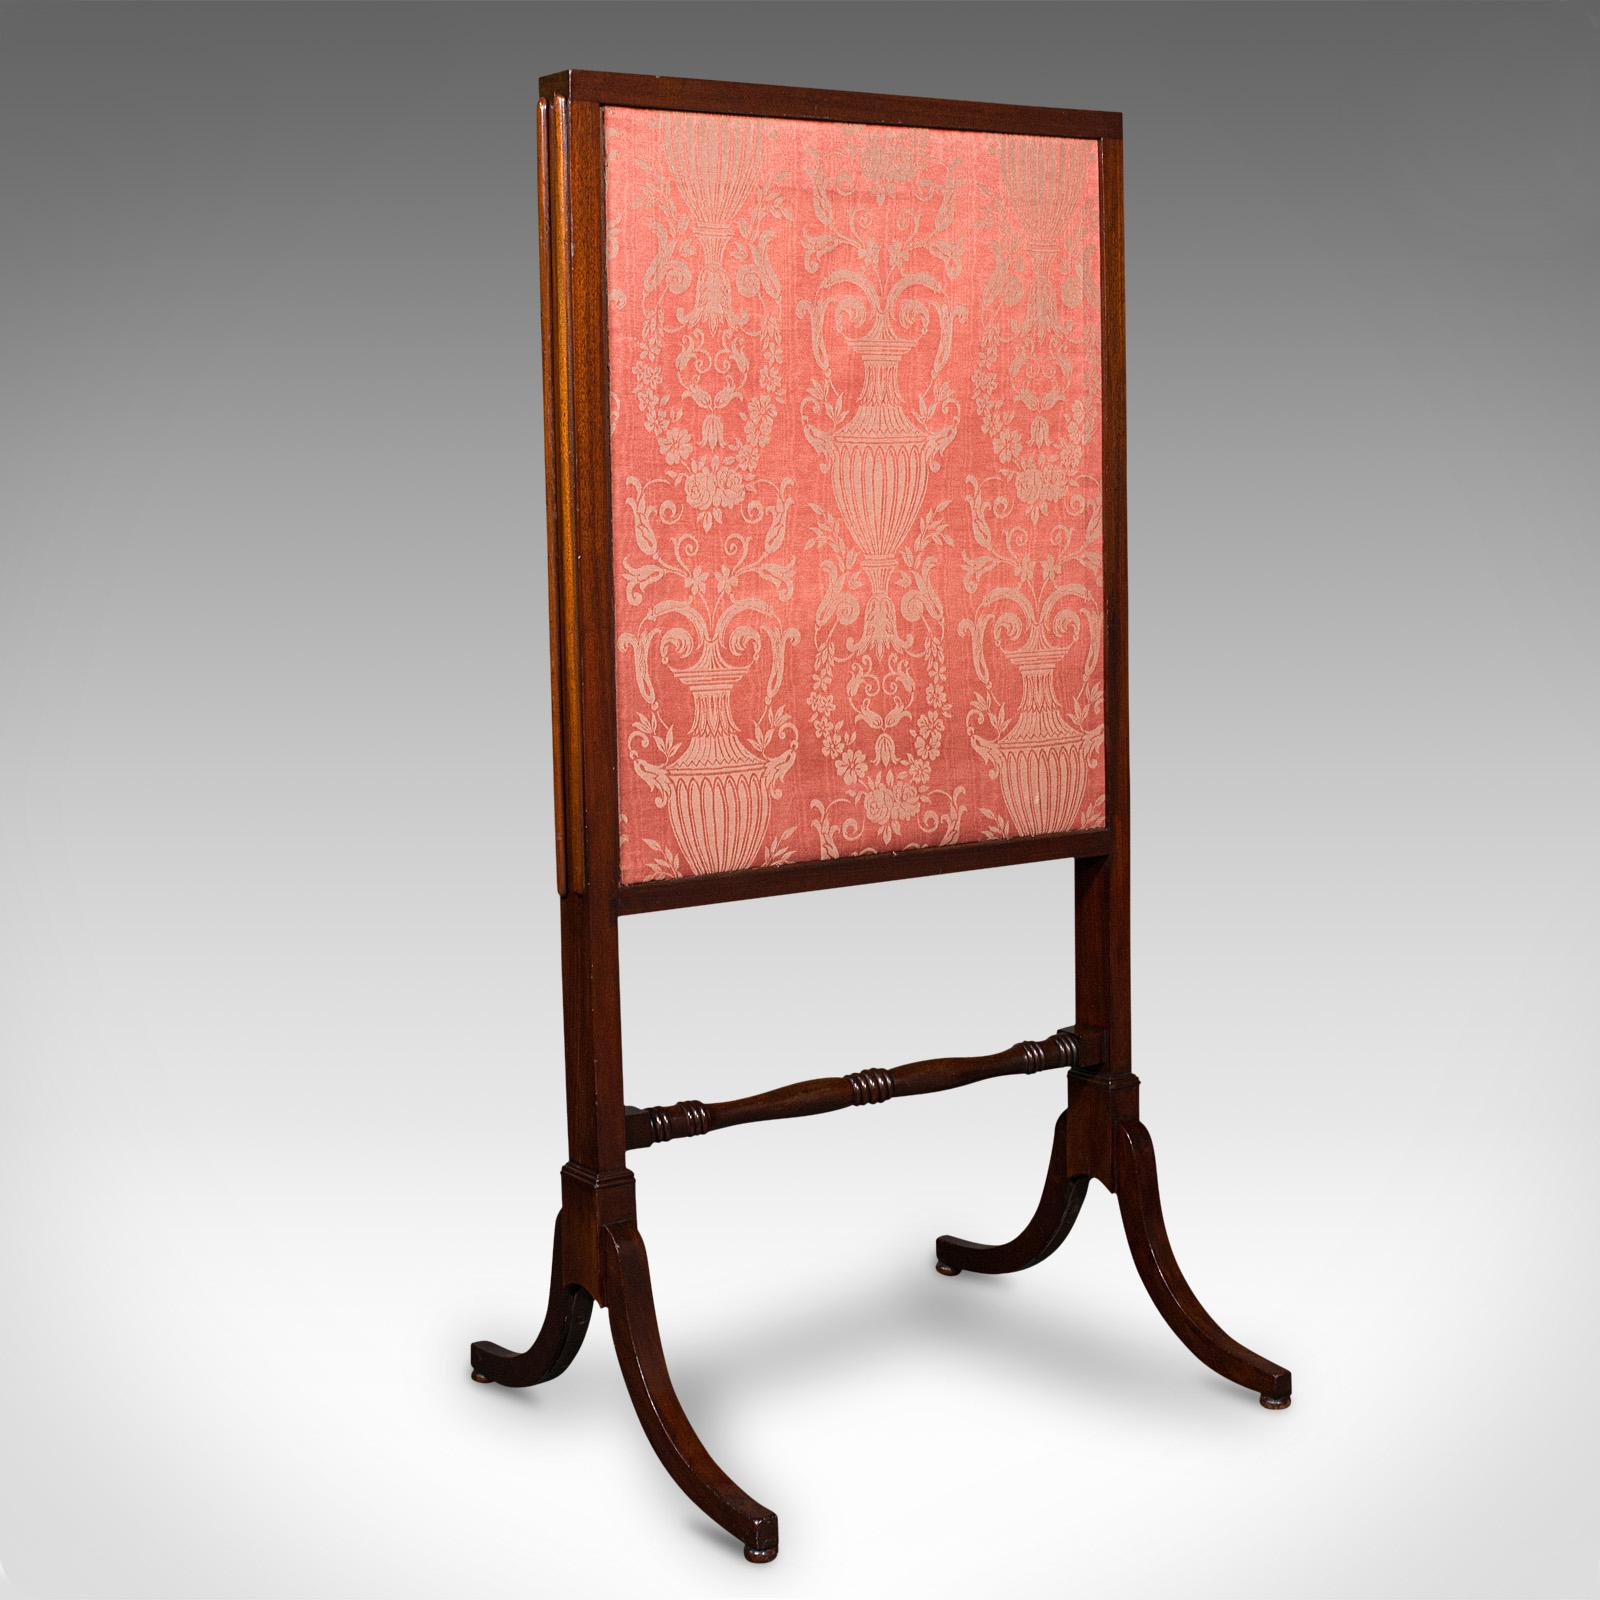 This is an antique extending fire screen. An English, mahogany and silk cotton fireside shield, dating to the mid Victorian period, circa 1860.

Fascinating three panel form to guard against the largest of fireplaces
Displays a desirable aged